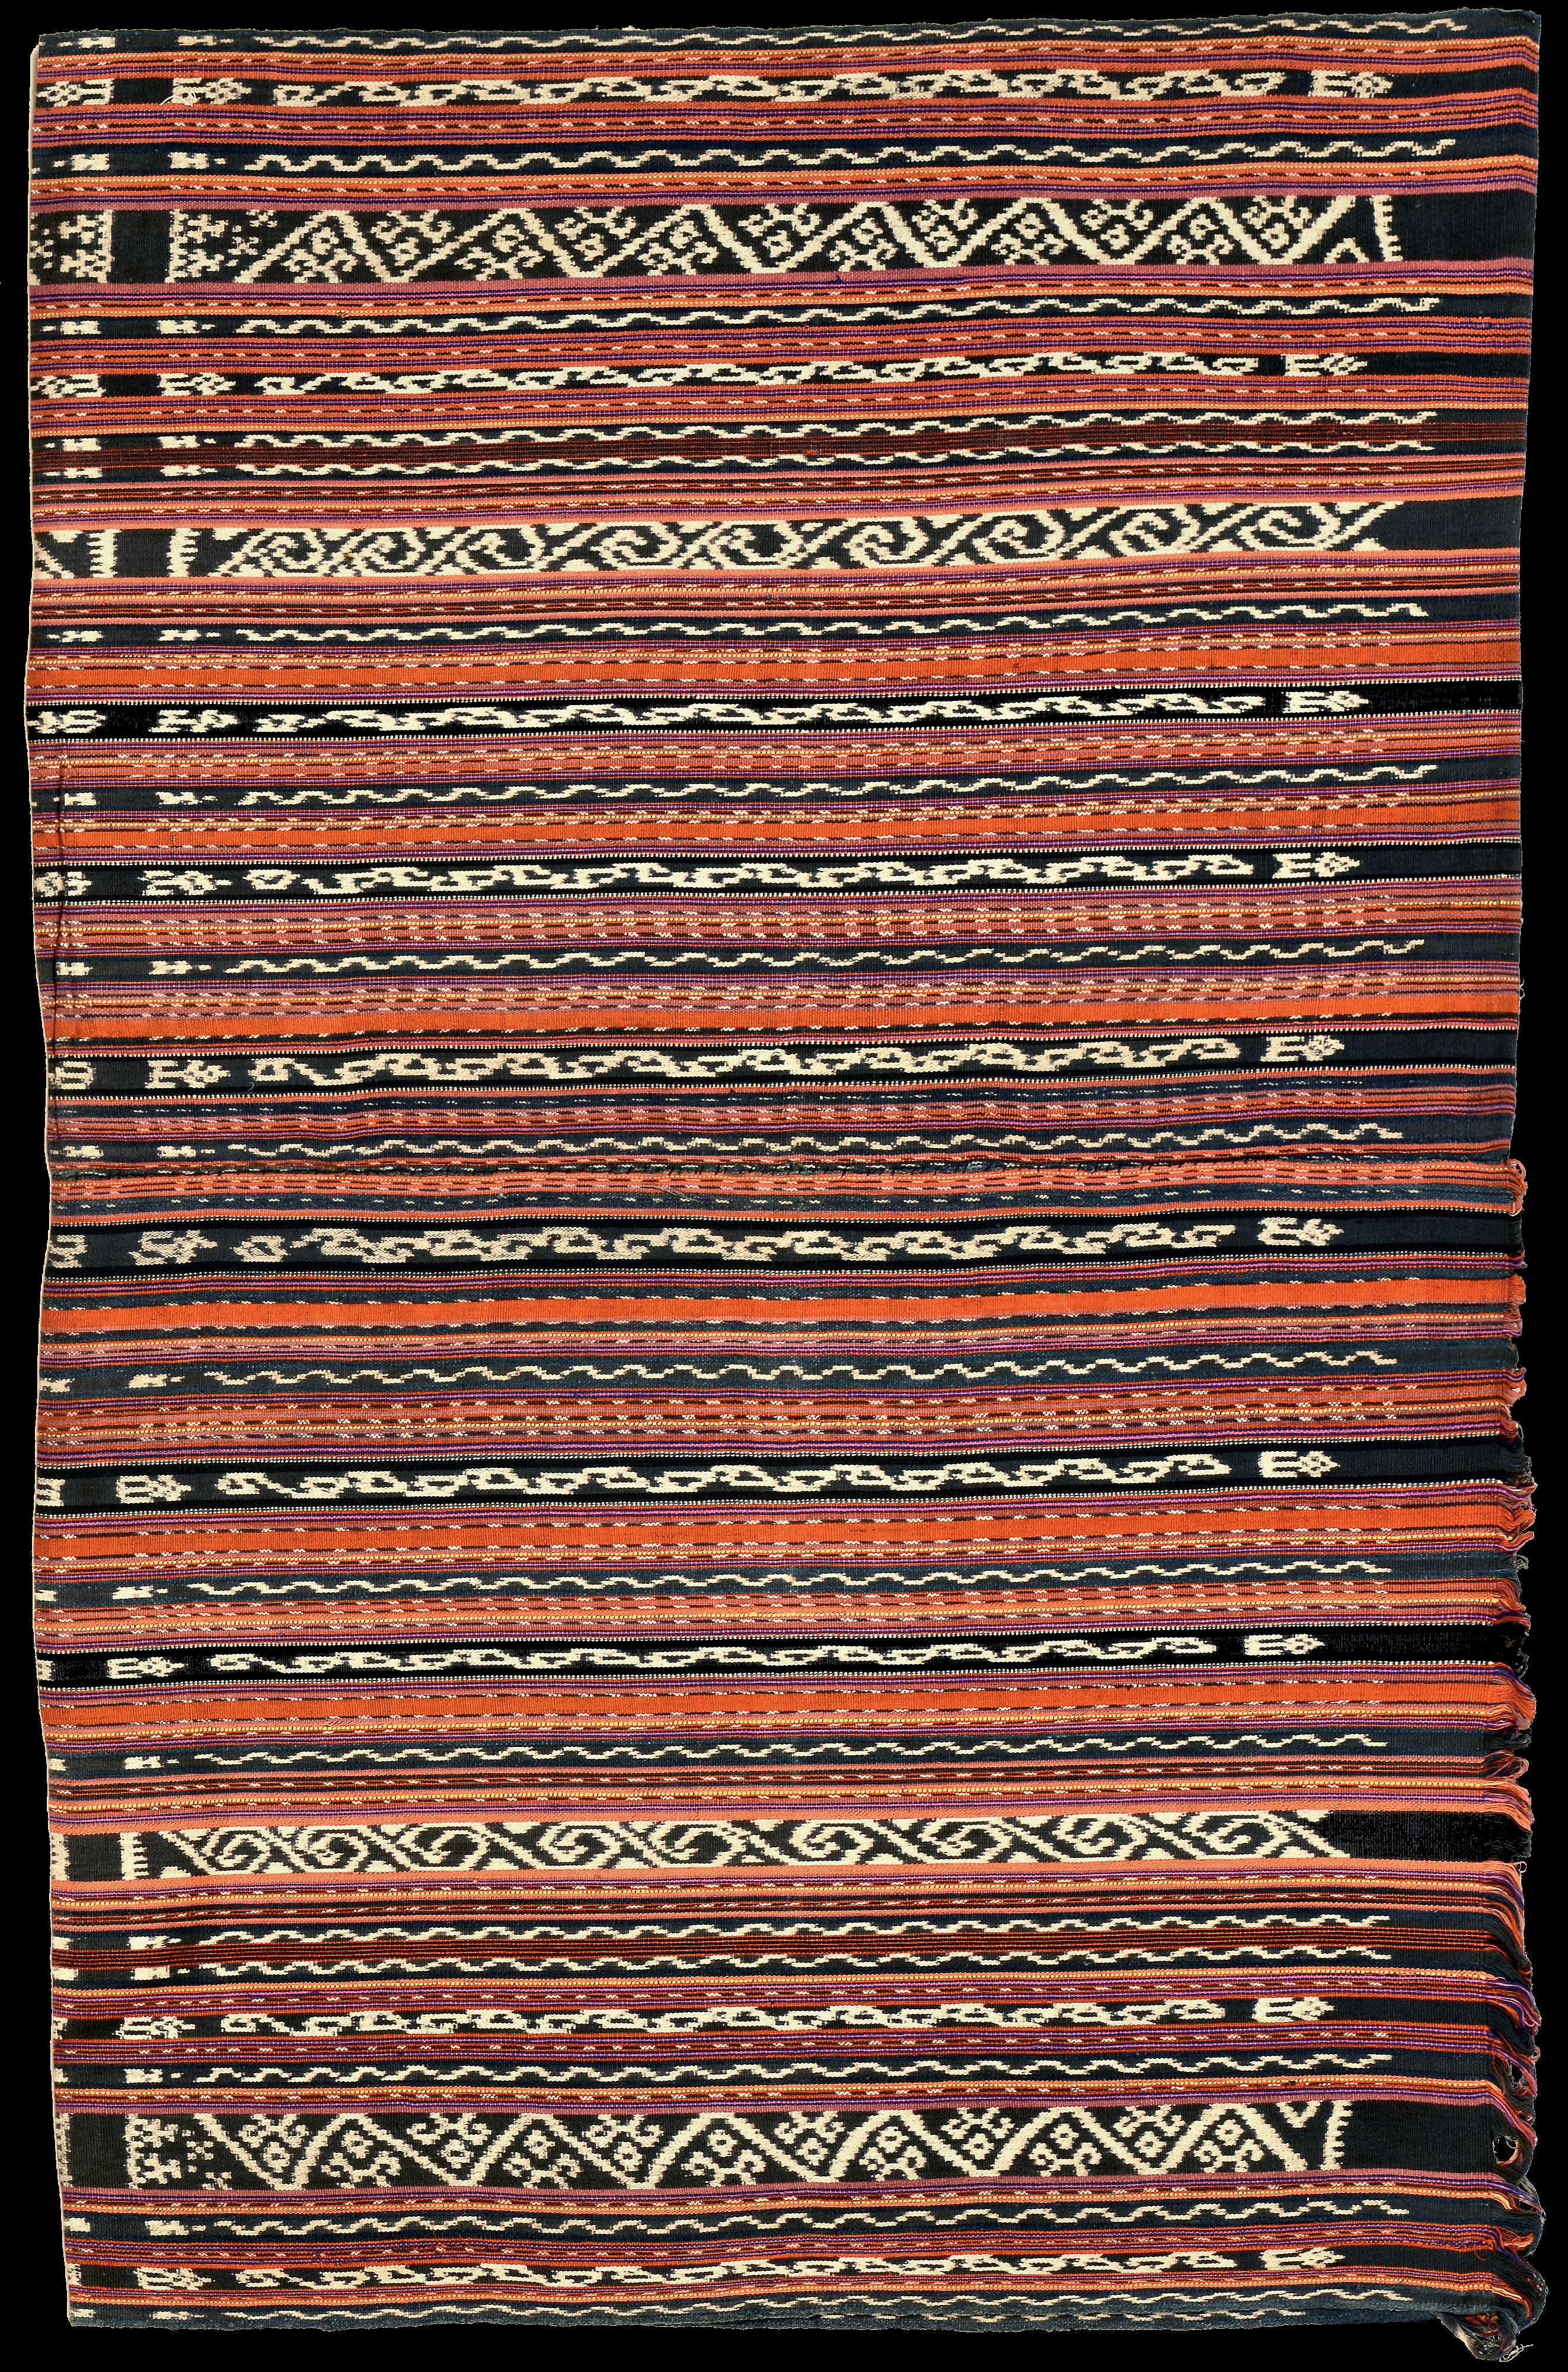 Ikat from Luang, Moluccas, Indonesia